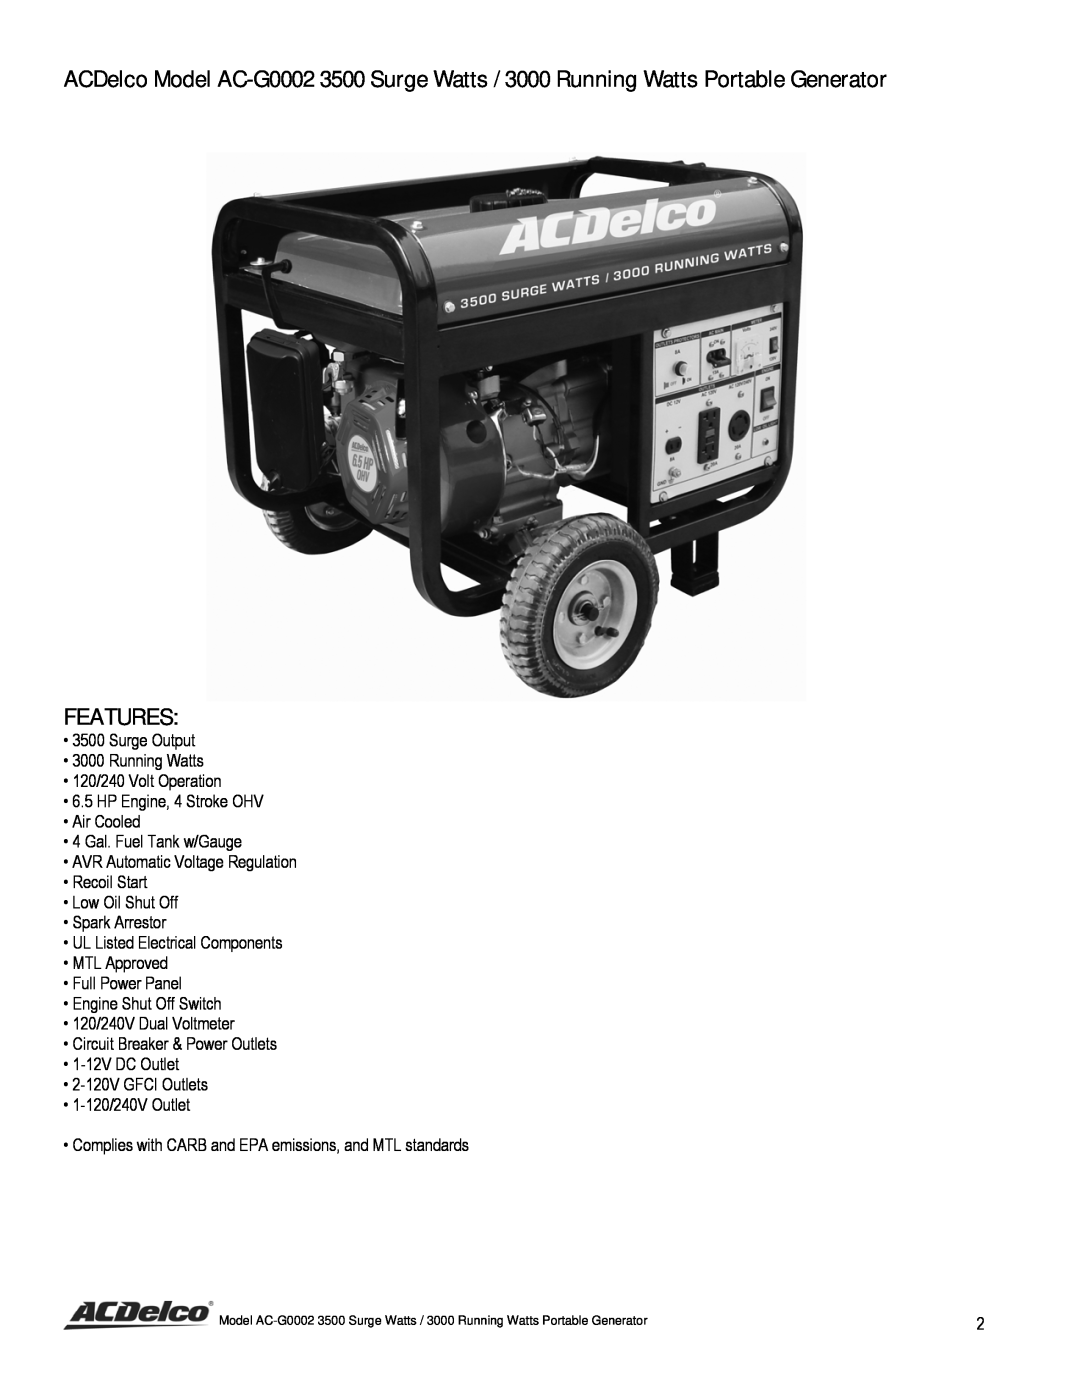 ACDelco AC-G0002 instruction manual Features 